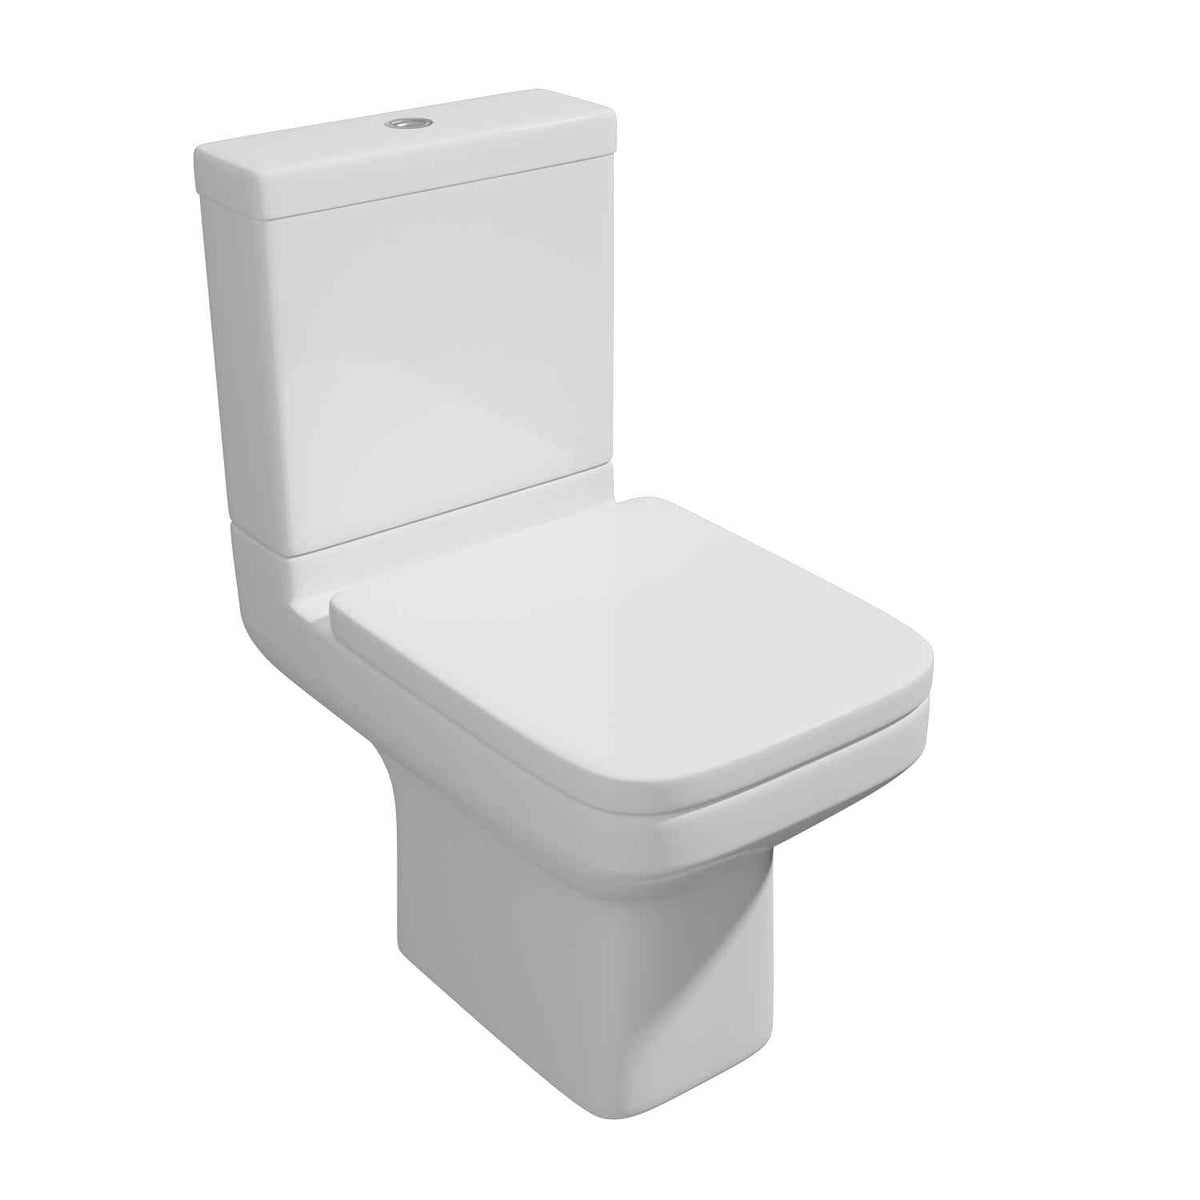 Kartell UK Trim C/C WC Pan with C/C Cistern and Soft Close Seat